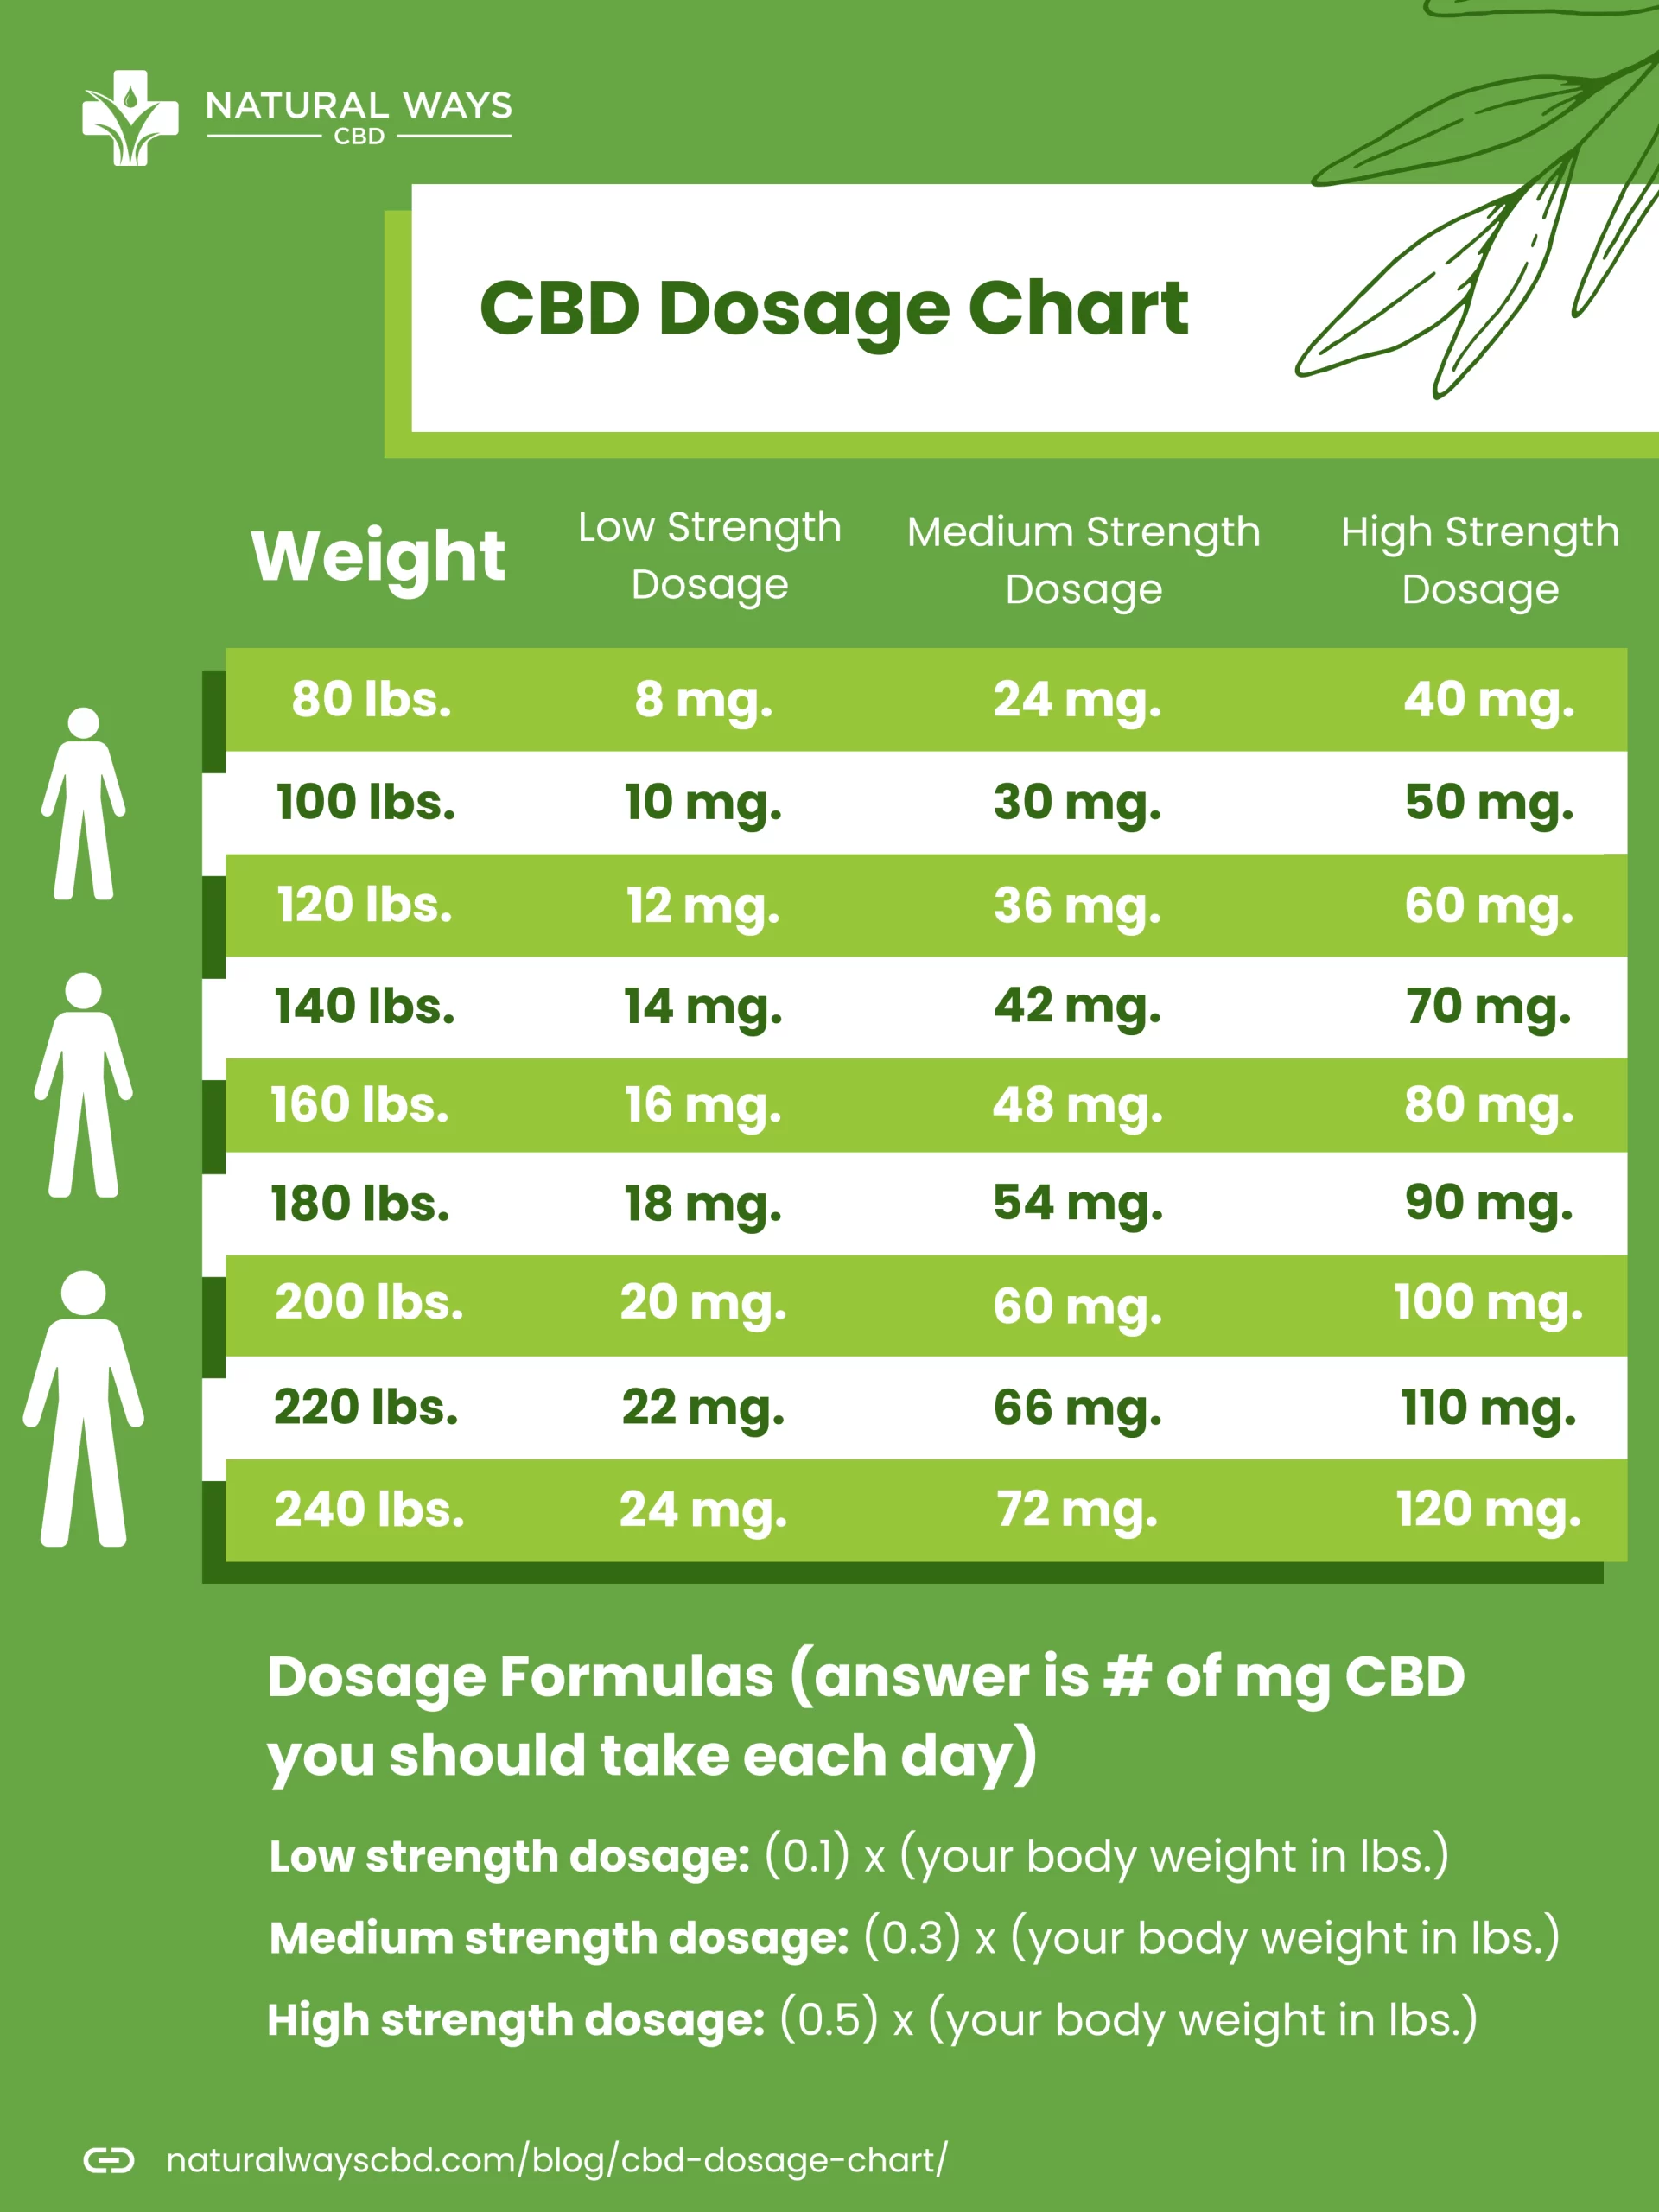 CBD Dosage Chart for Anxiety, Pain, and Sleep